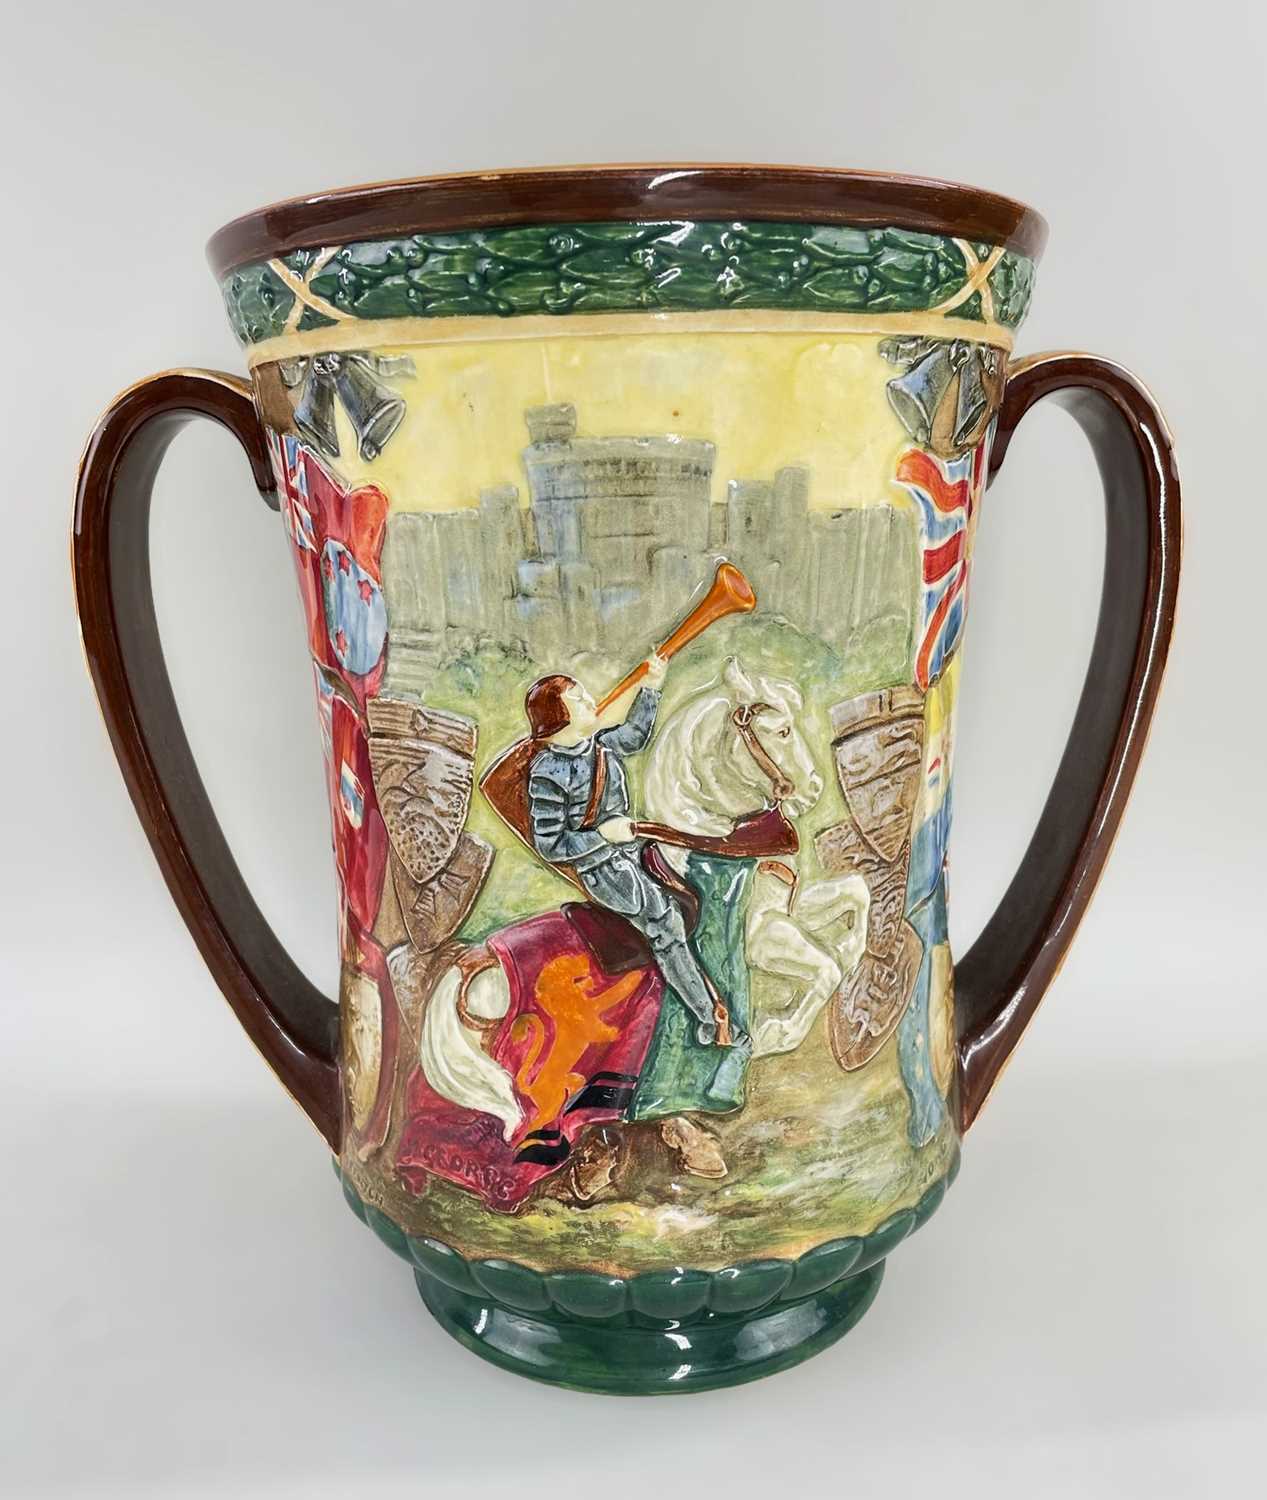 ROYAL DOULTON LOVING CUP, commemorating the Coronation of Edward VIII, limited edition 351/2000, - Image 2 of 4